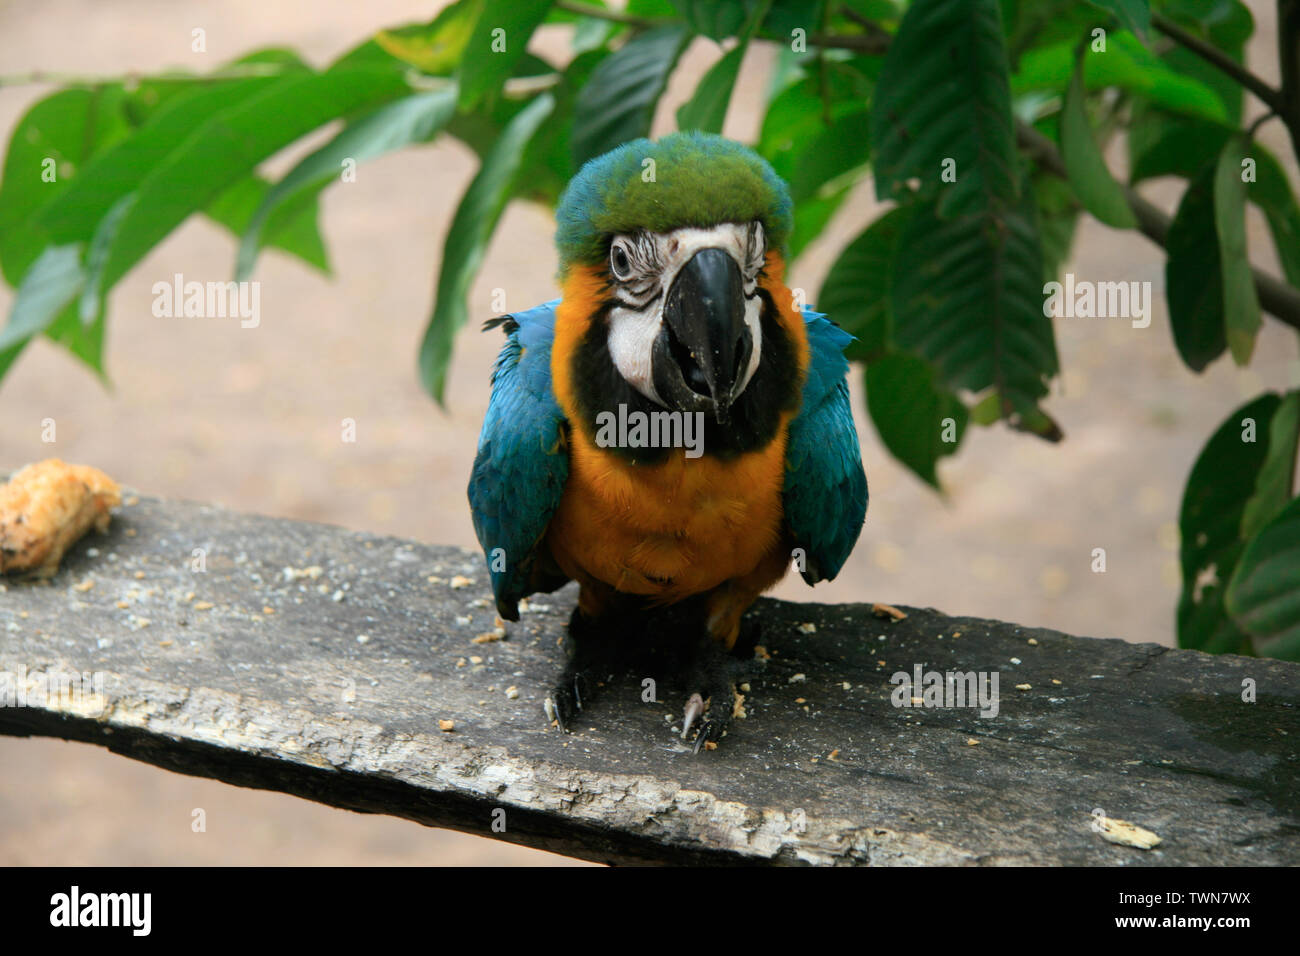 A tamed parrot in an Indian reservation Stock Photo